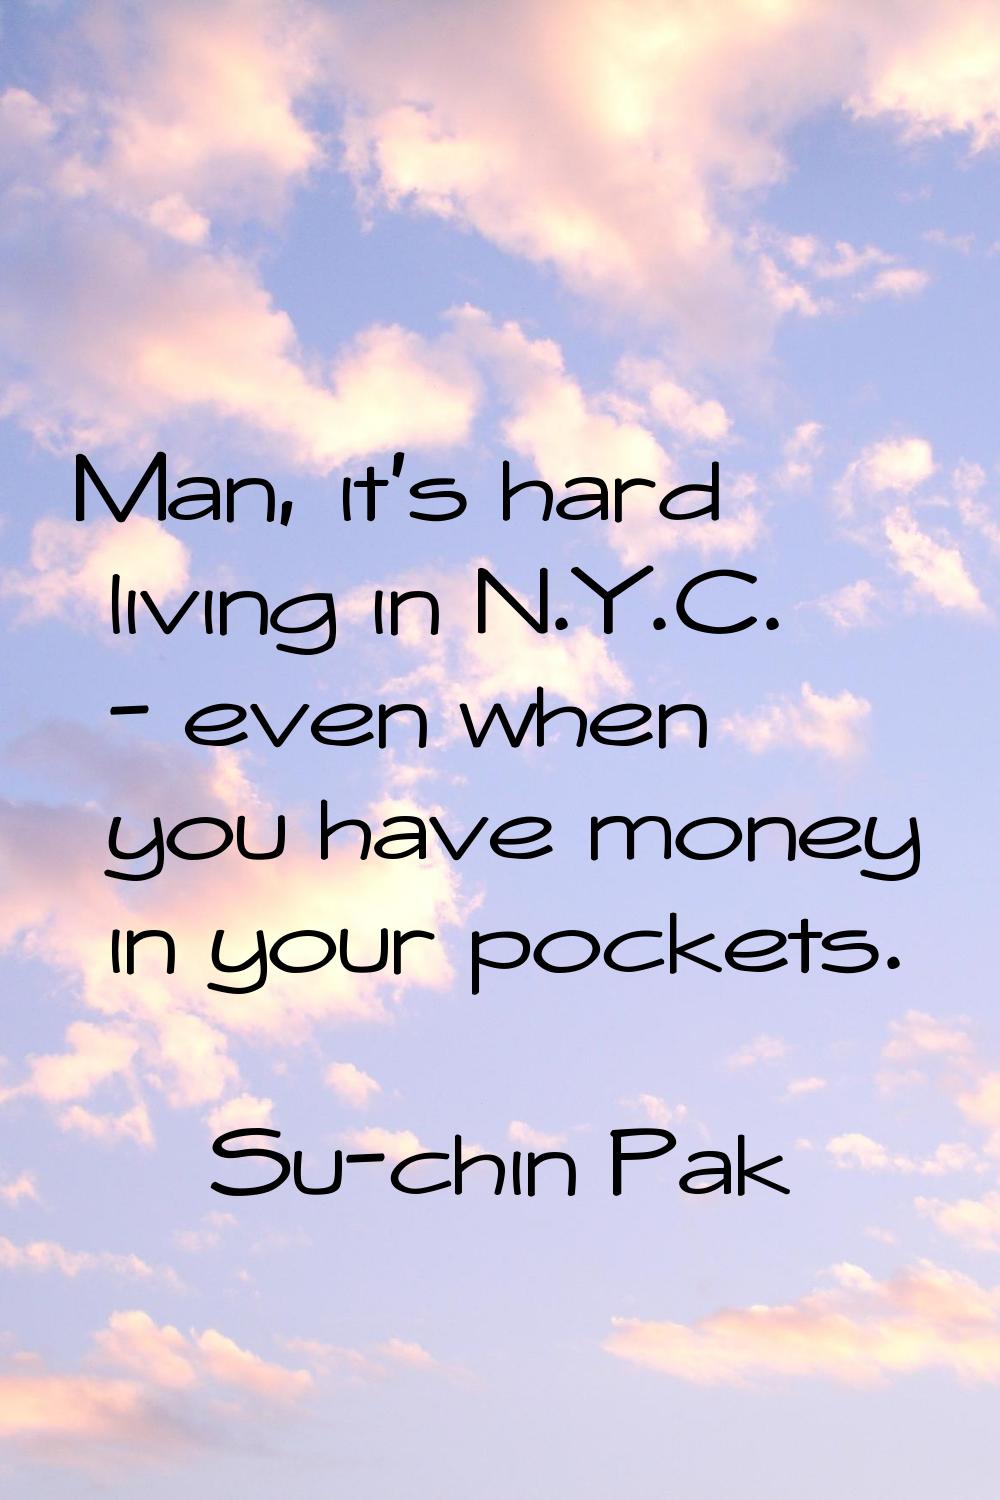 Man, it's hard living in N.Y.C. - even when you have money in your pockets.